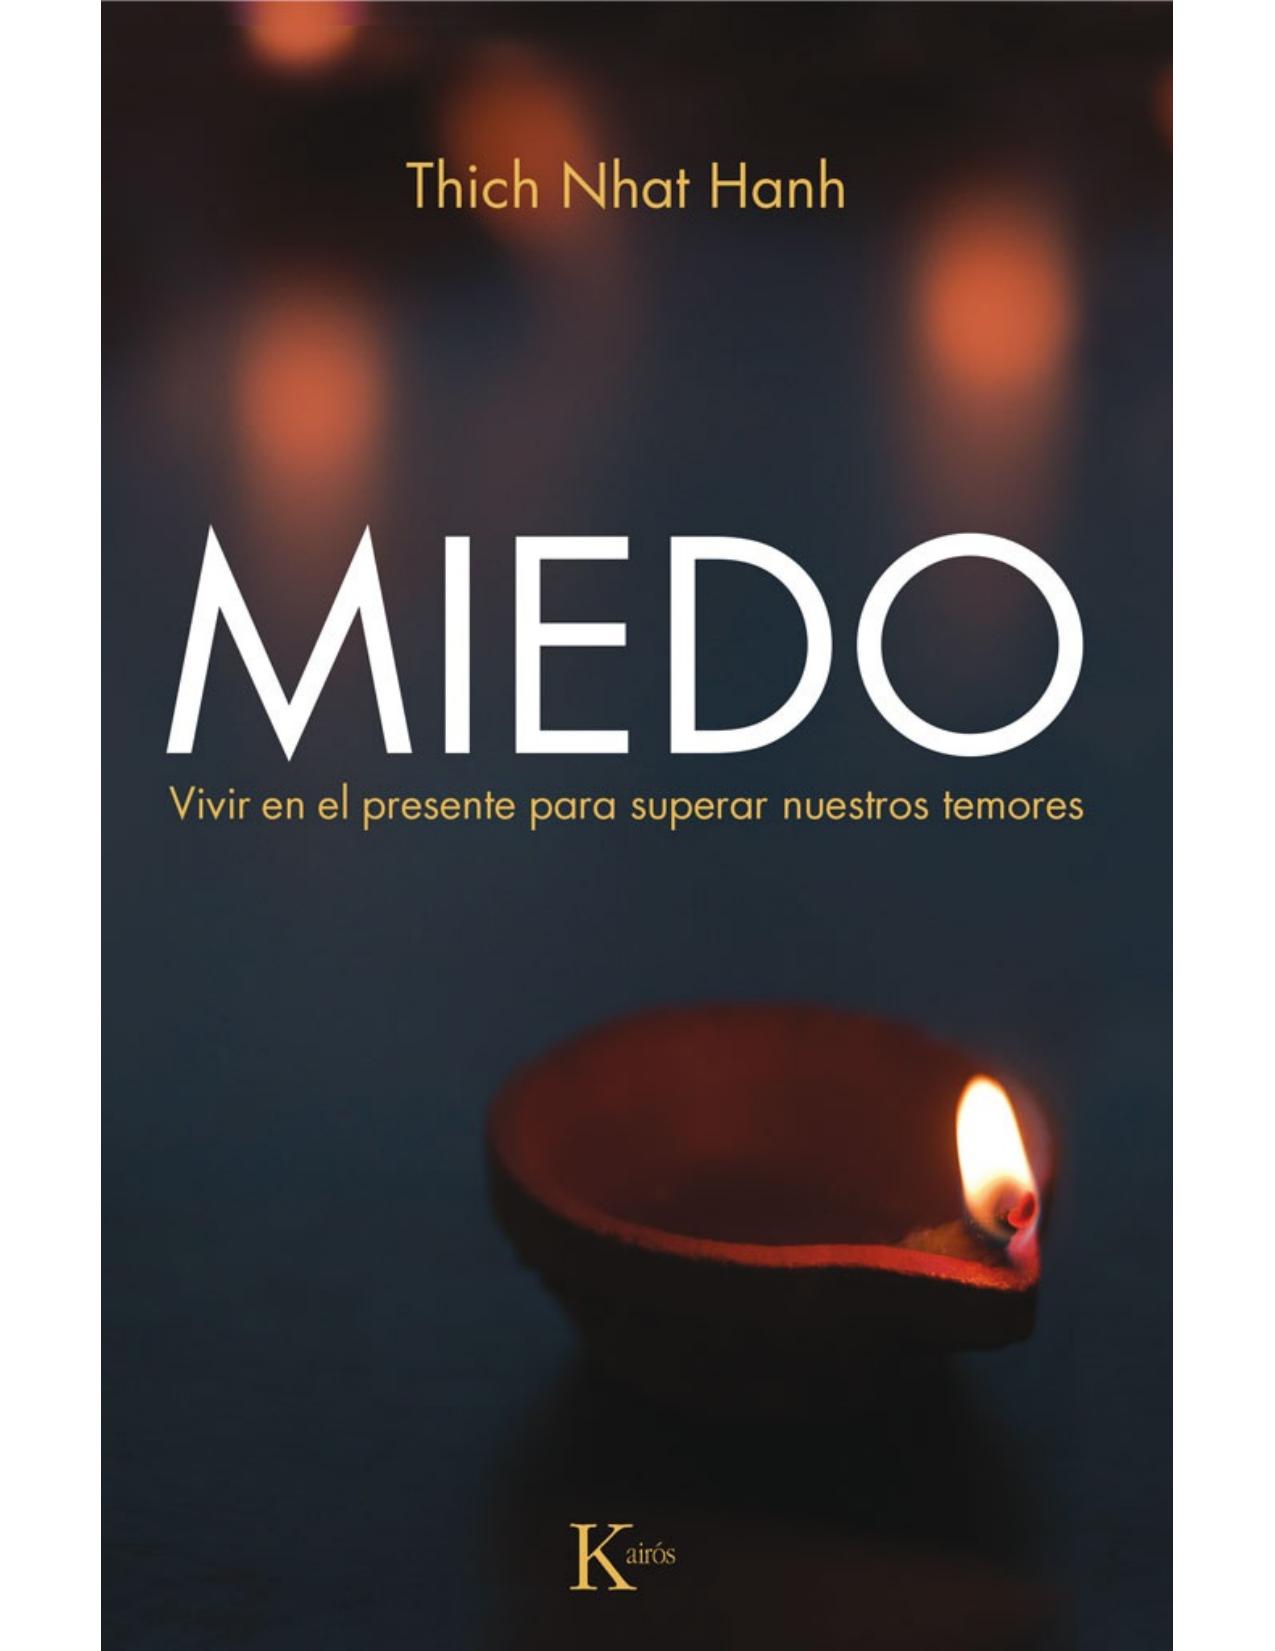 MIEDO (Spanish Edition) by Thich Nhat Hanh